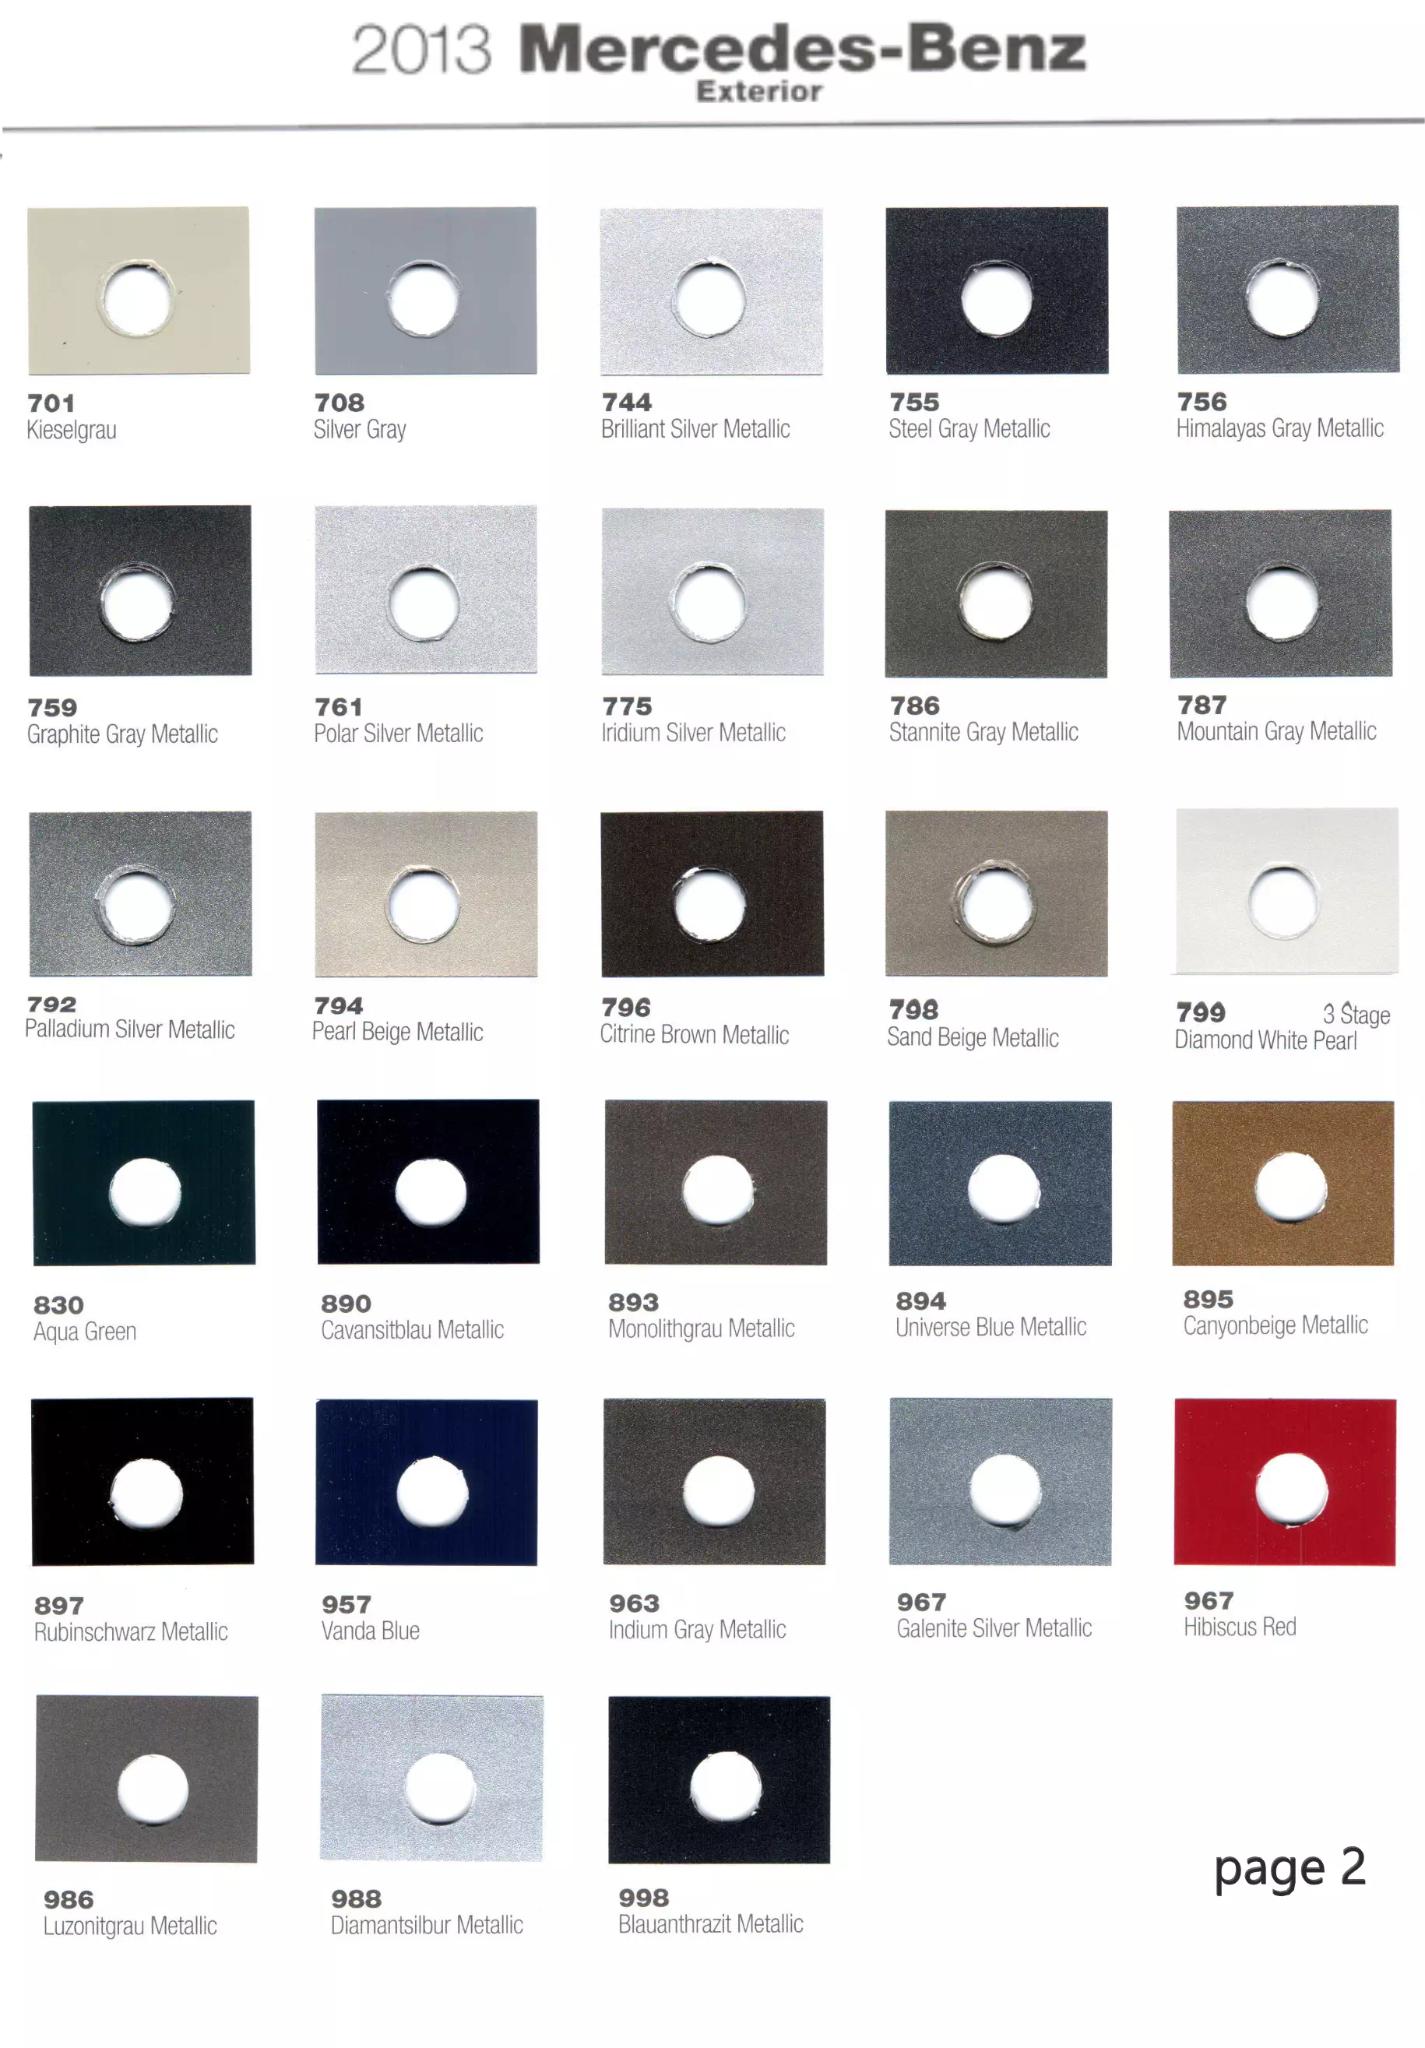 Exterior Paint swatches, color names and Color codes used on Mercedes-benz in 2013